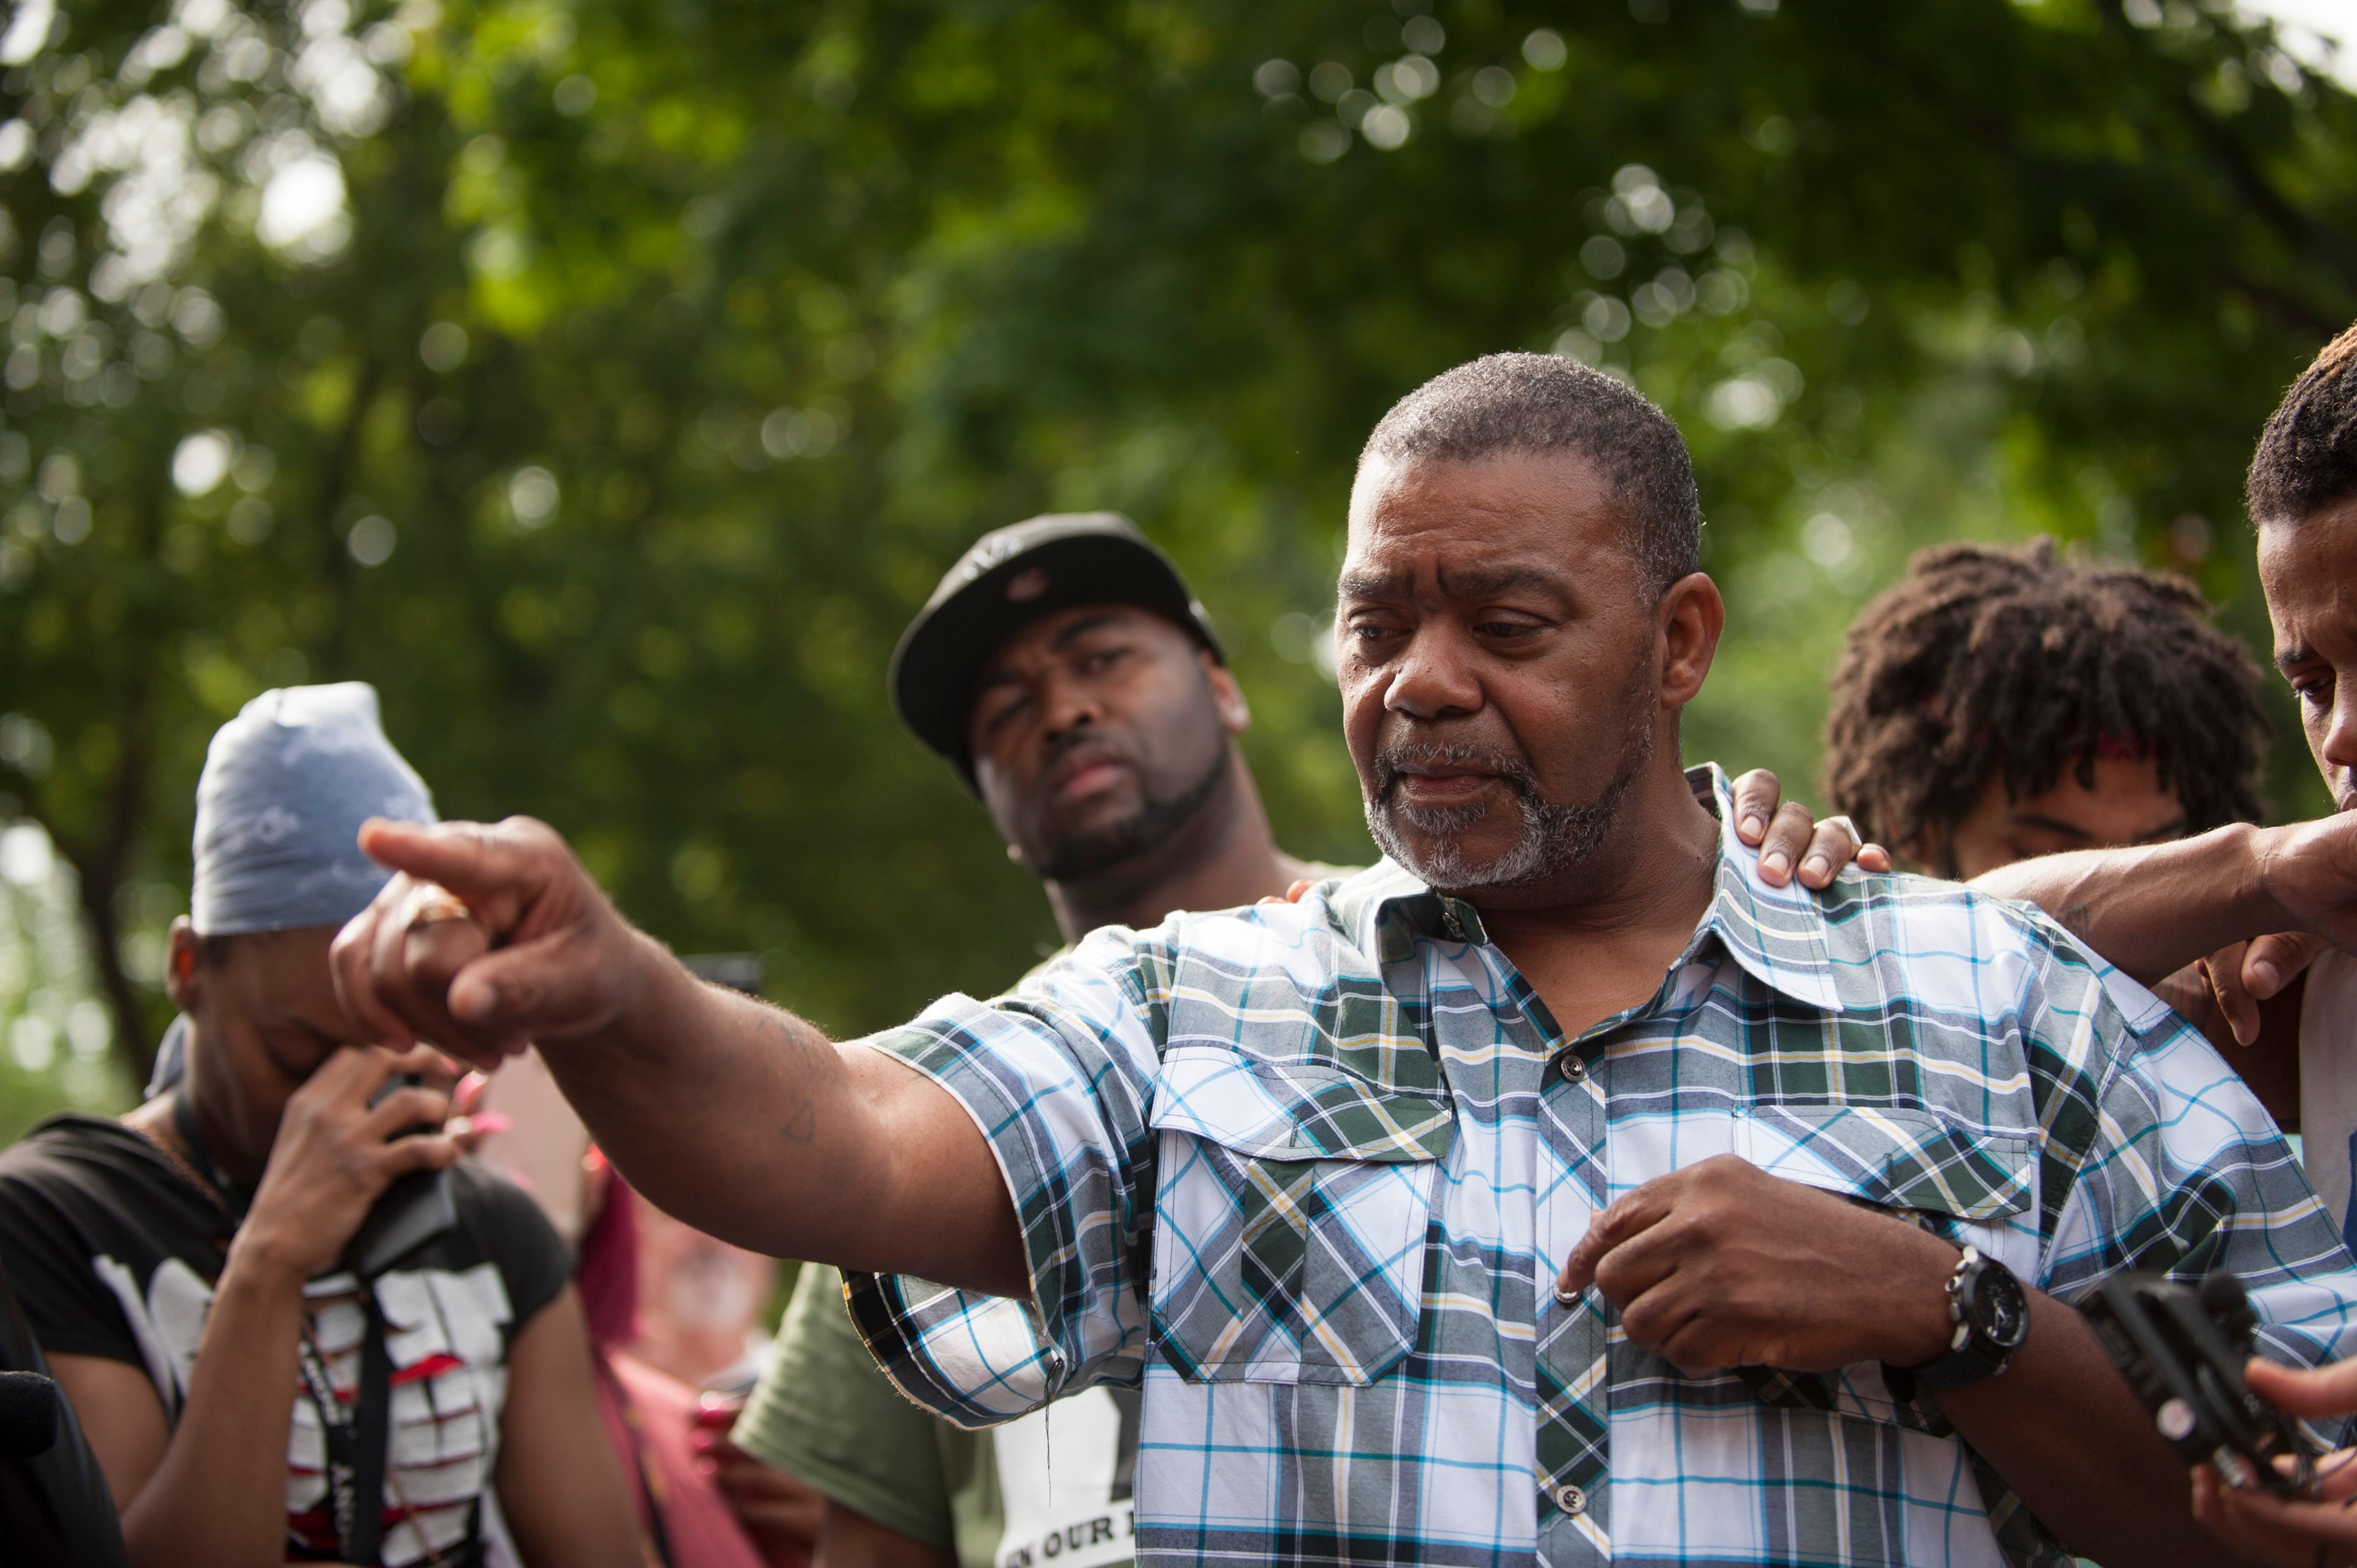 Clarence D. Castile, uncle of Philando Castile, speaks outside the Governor's Mansion on July 7, 2016 in St. Paul, Minnesota. (Stephen Maturen; Getty Images)